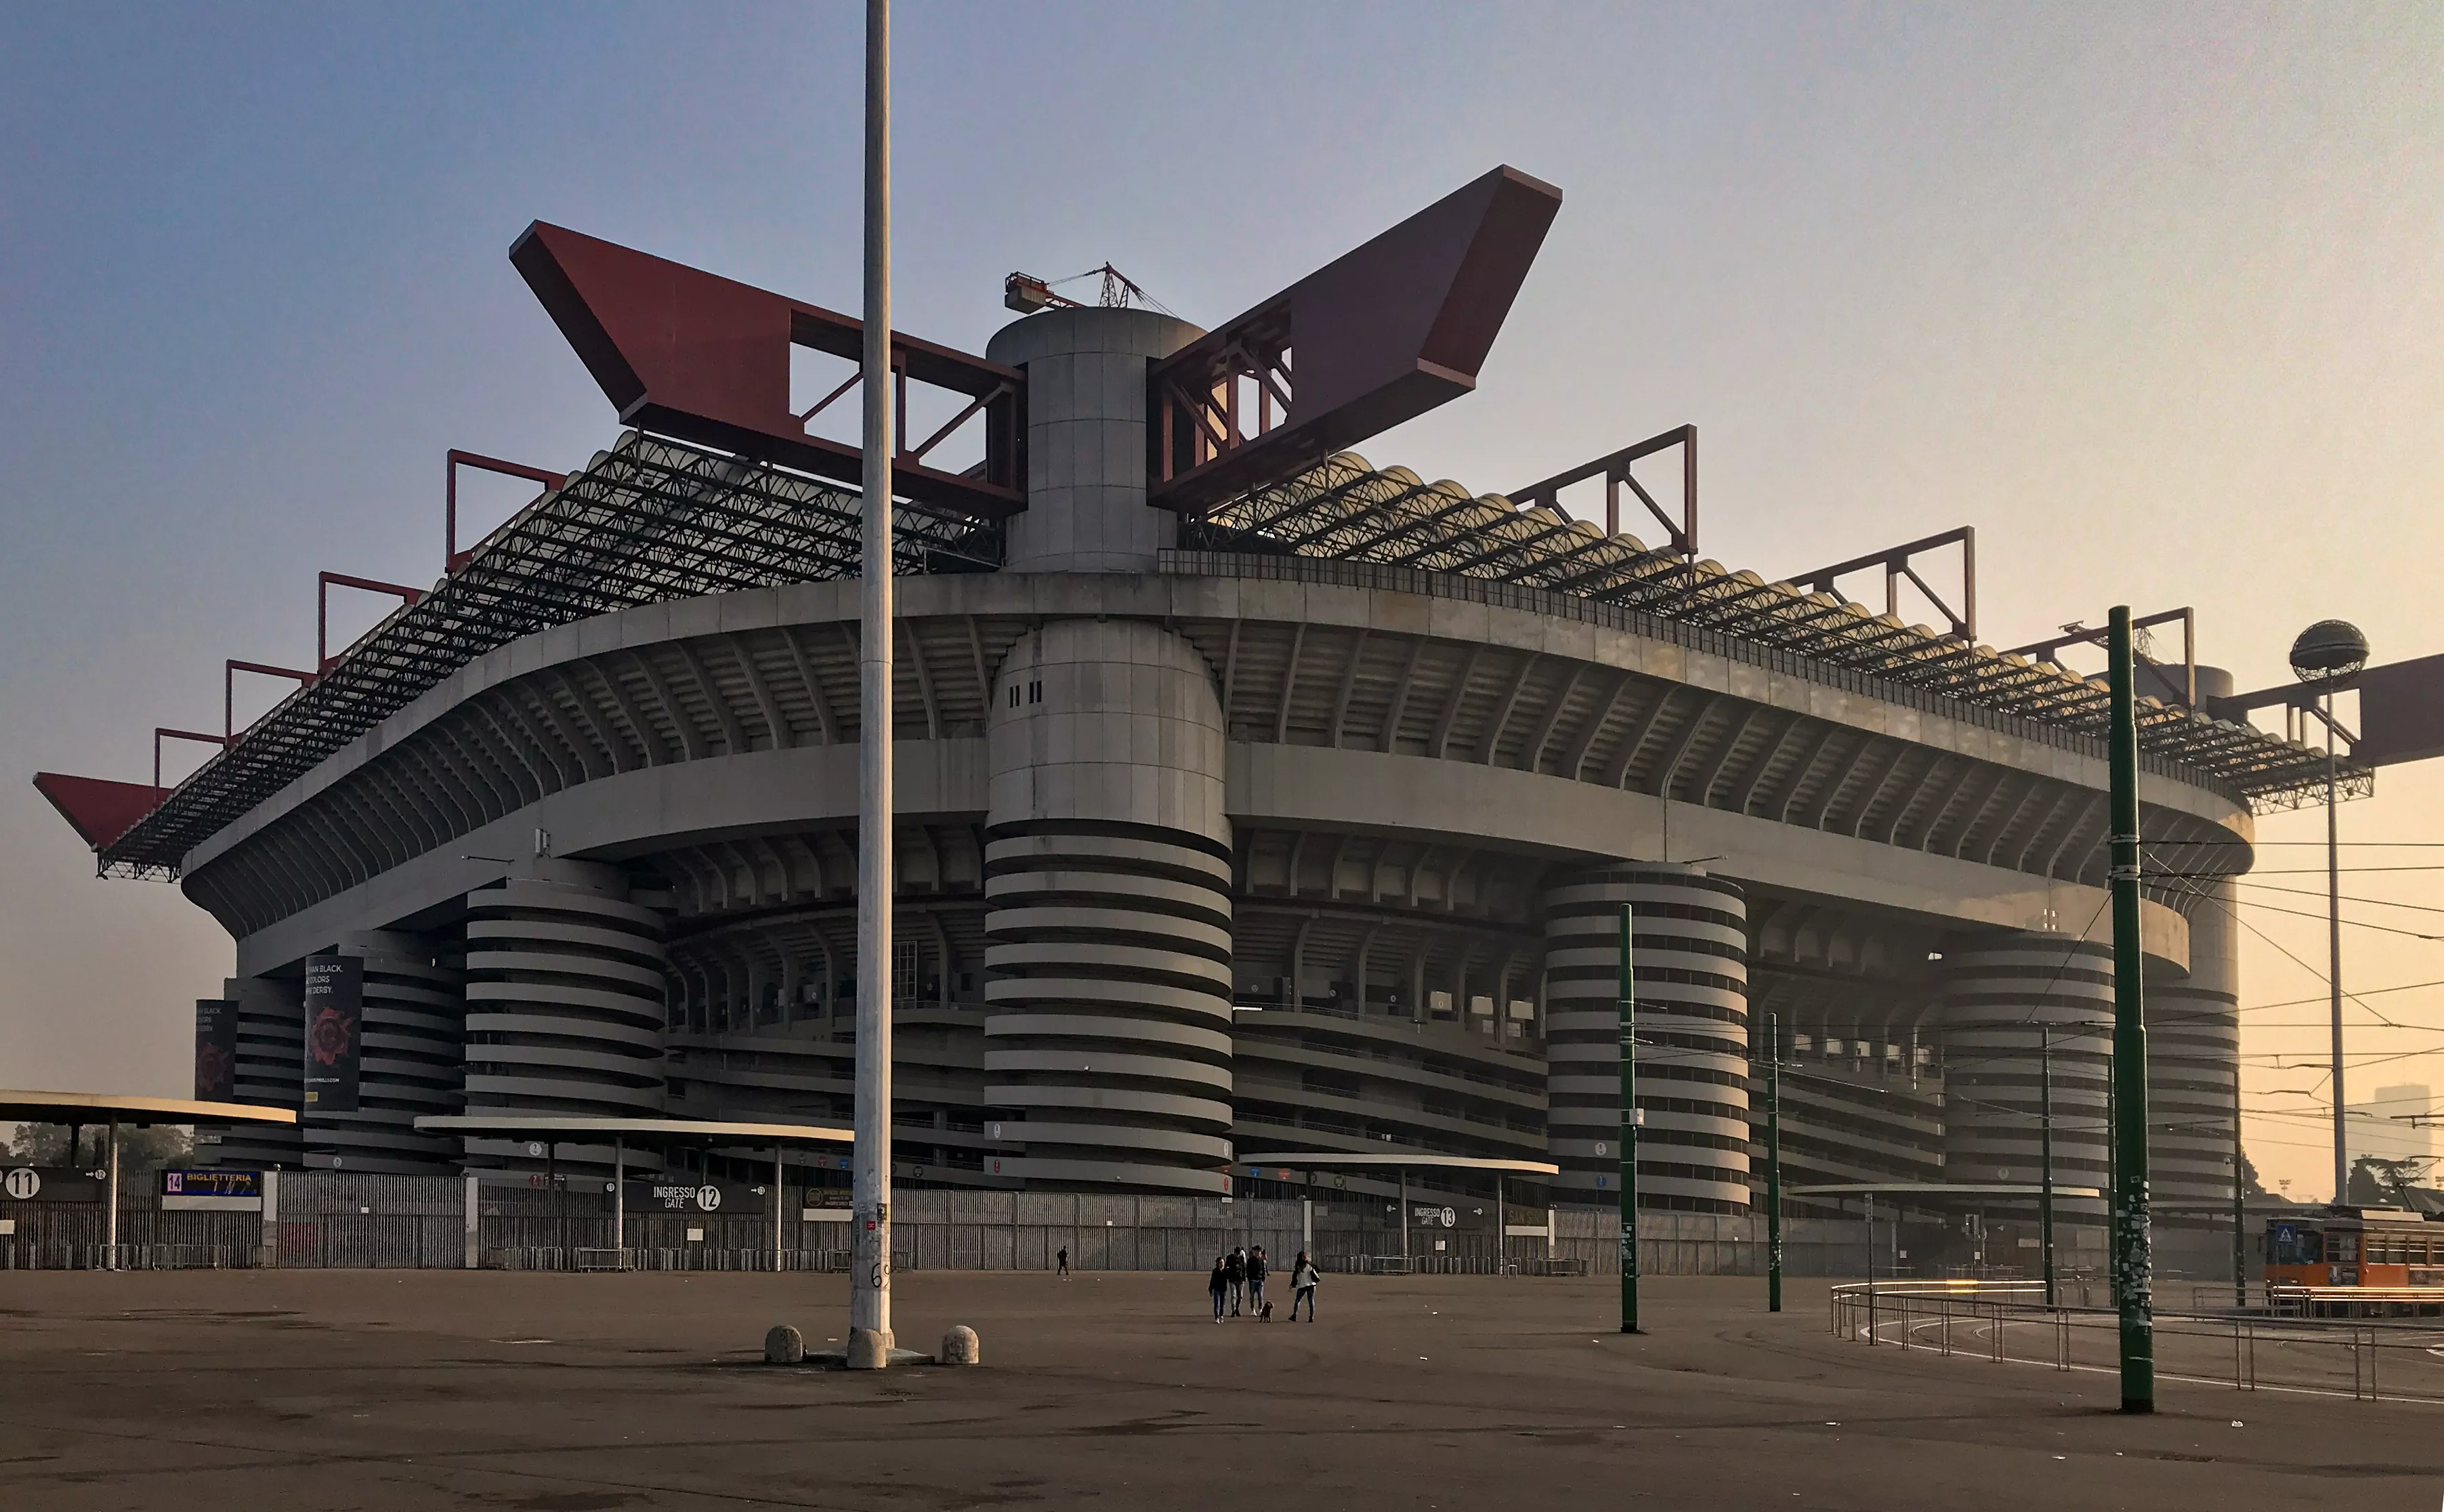 Giuseppe Meazza in Italy, Europe | Architecture - Rated 4.9